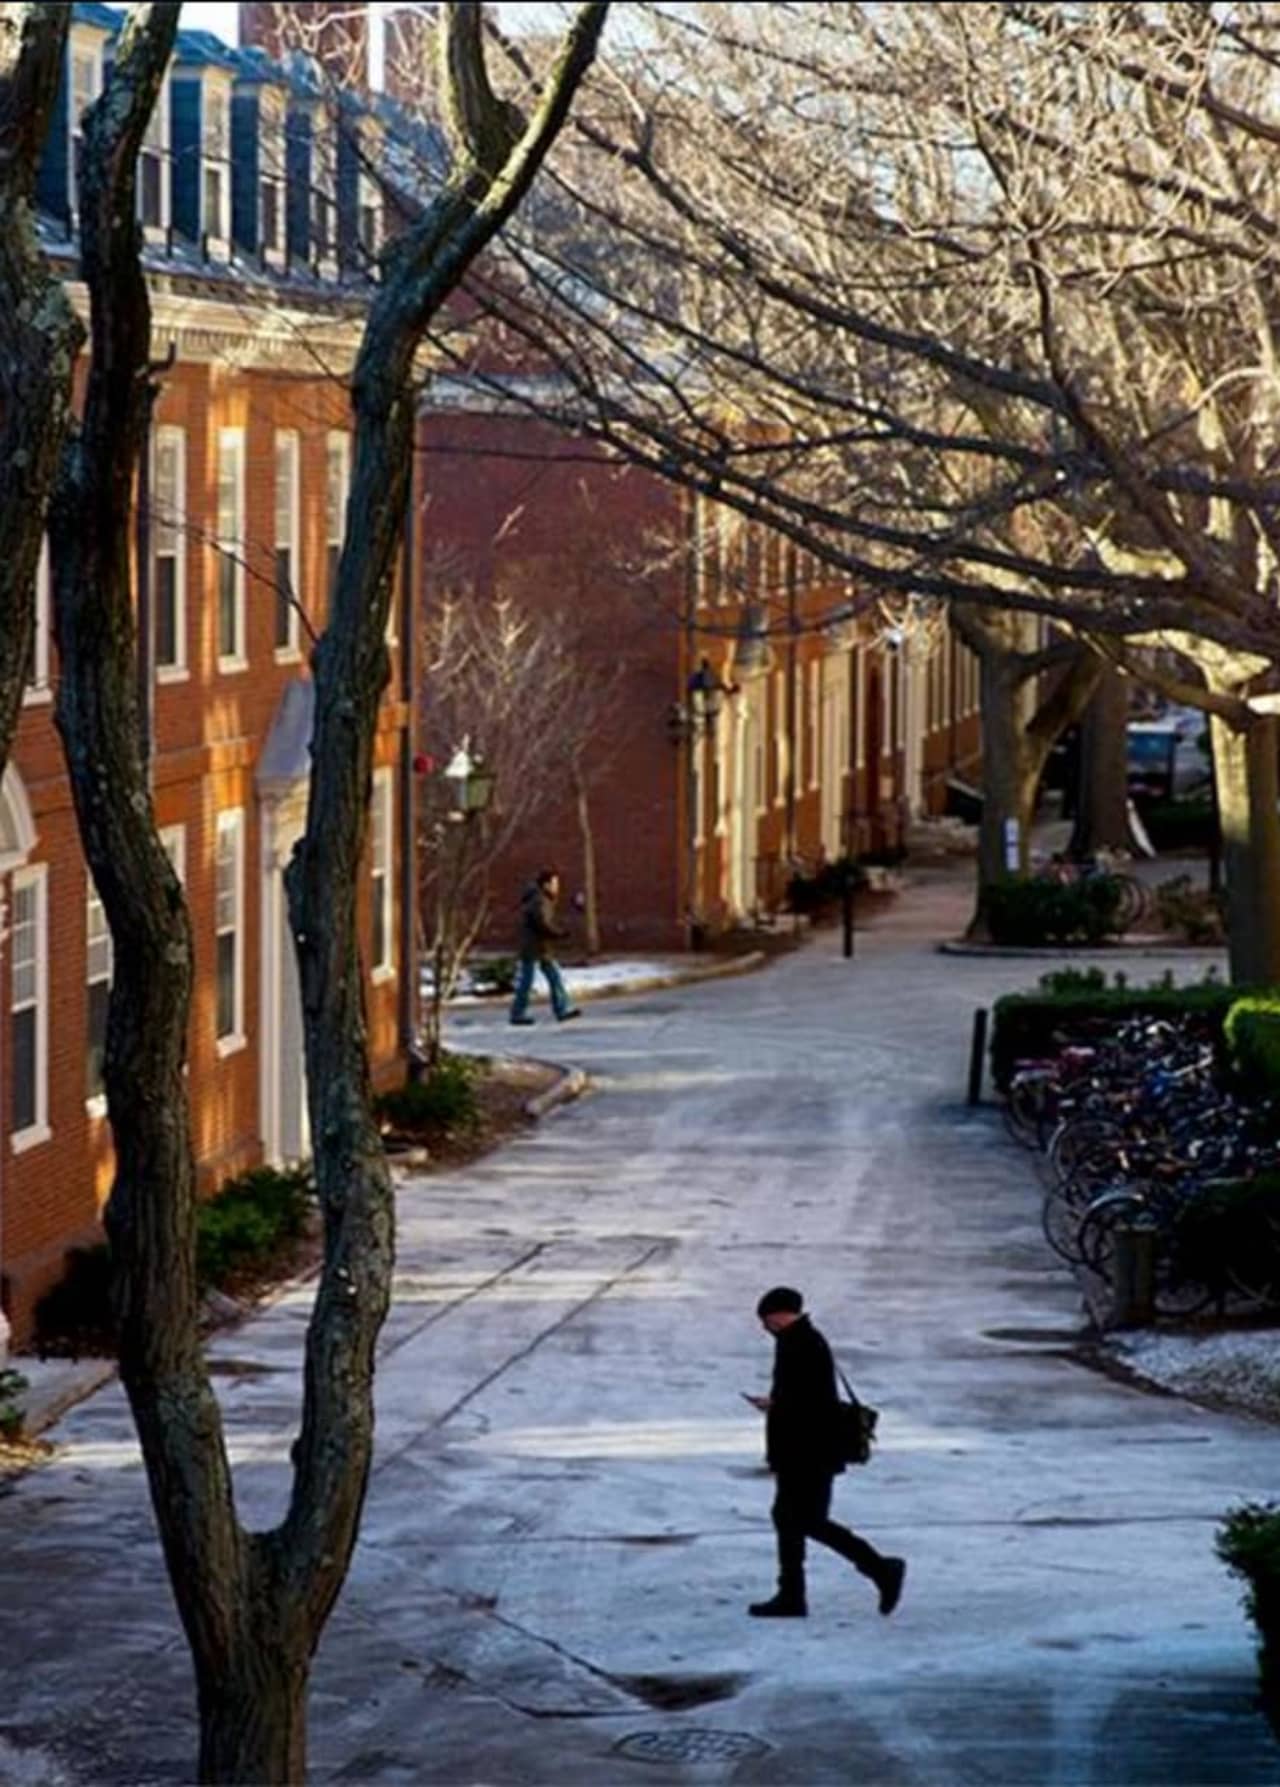 A mumps outbreak at Harvard University could threaten its May 26 graduation ceremonies.